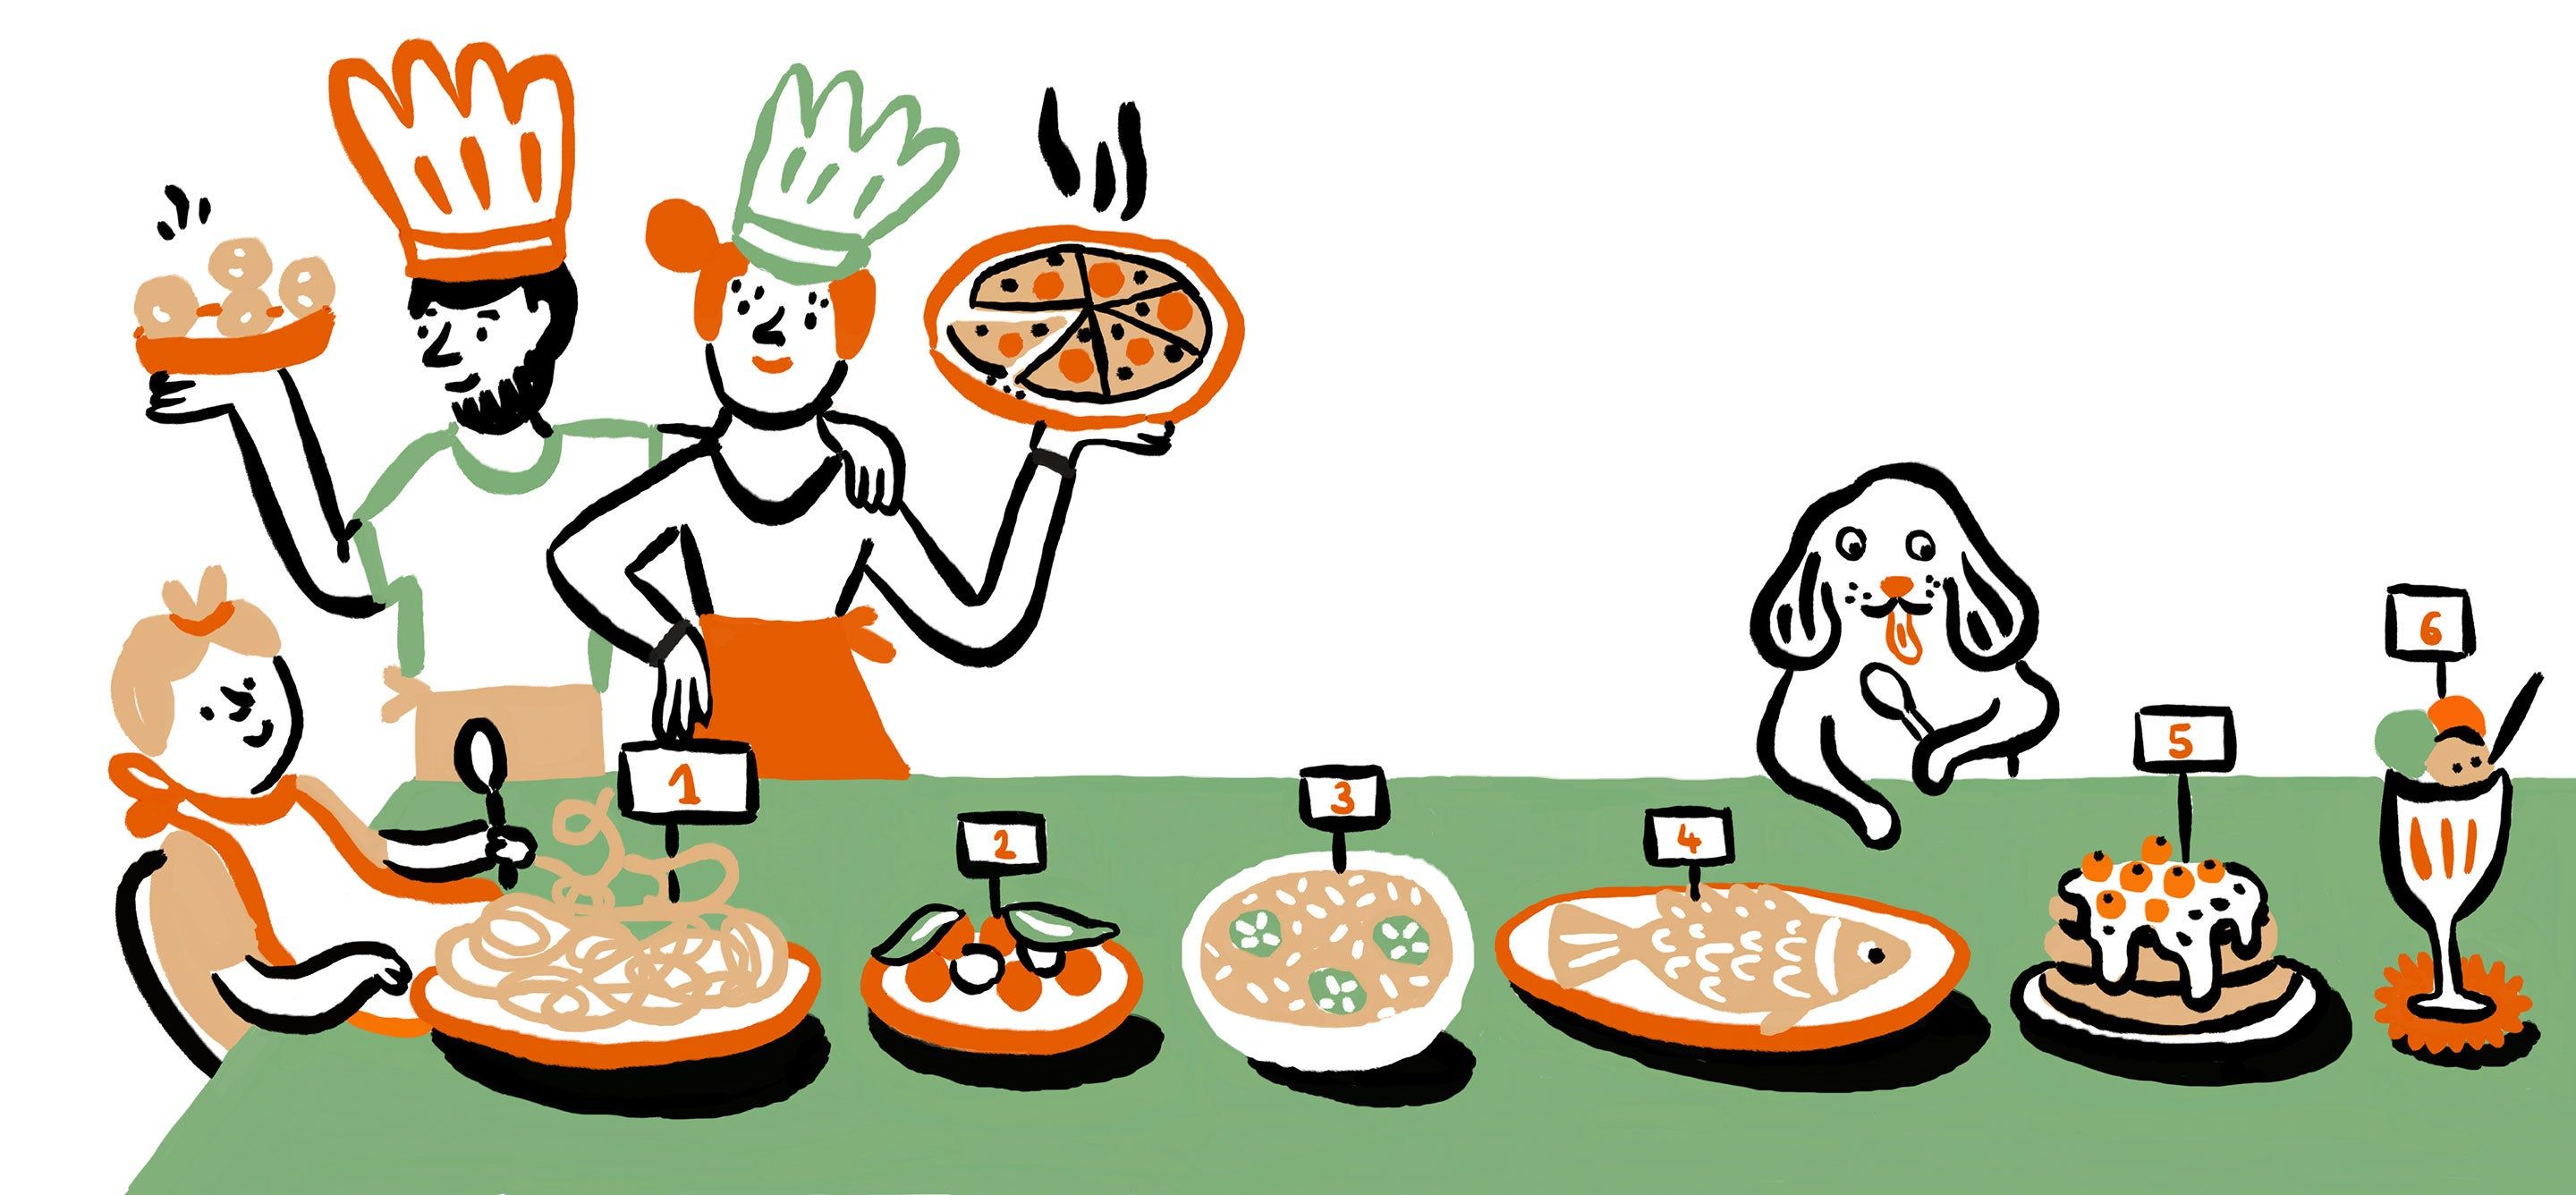 Illustrations of mother and father serving a buffet table of Italian food to their child